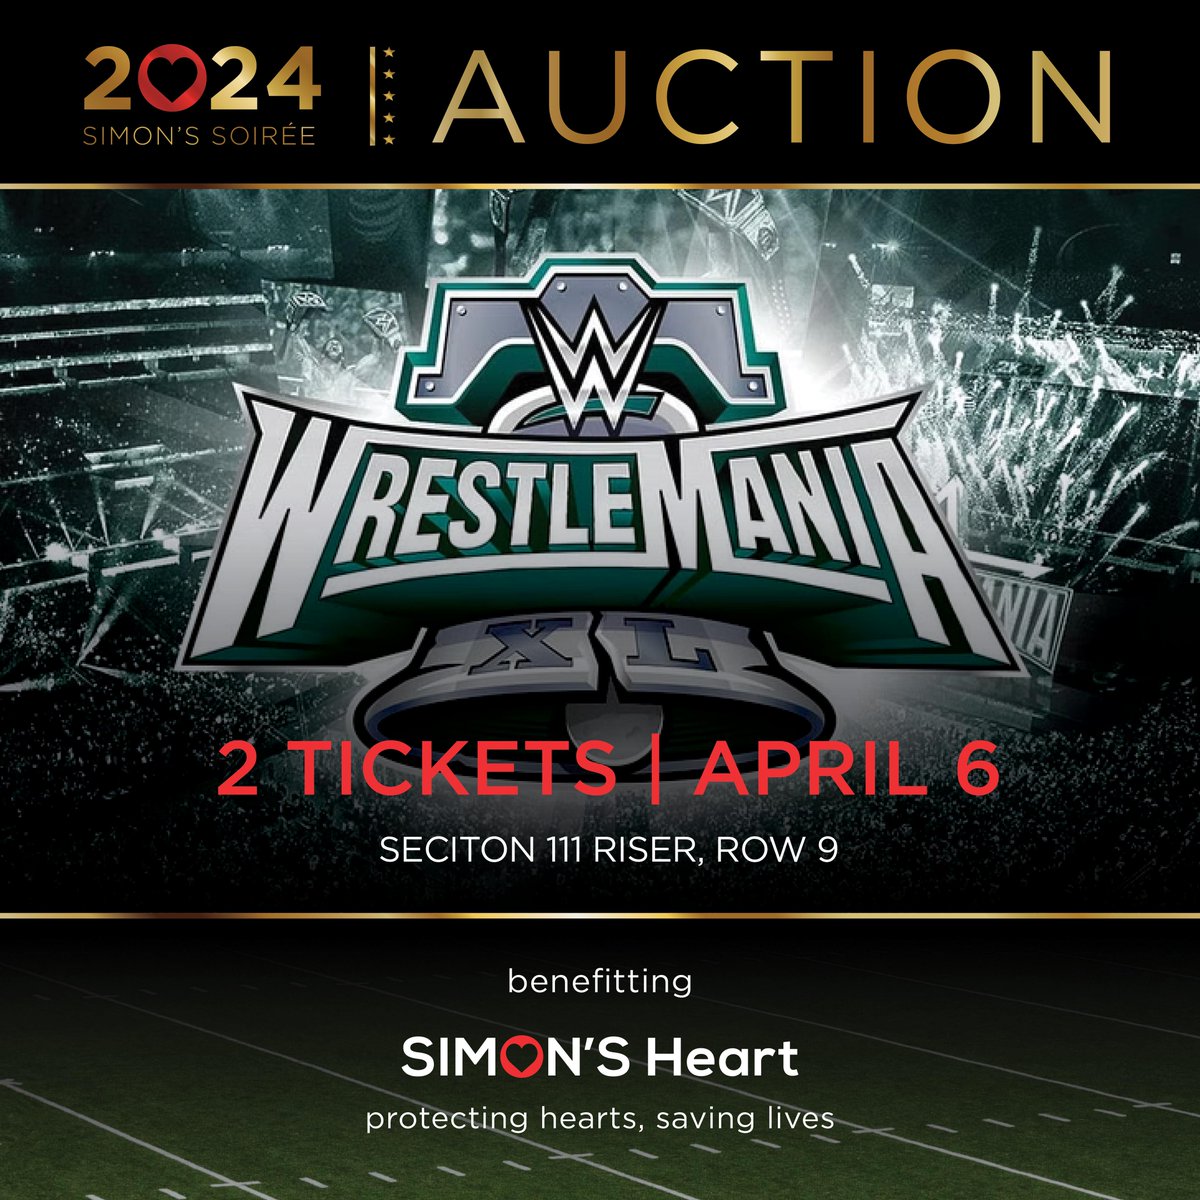 Let's get ready to rumble! Place your bids for two (2) tickets to WrestleMania XL in Philly on April 6th! Great seats for an epic event. You don't have to attend Simon's Soiree to place your bid on any of these Auction Items! Place your bid online: bit.ly/42A30YN